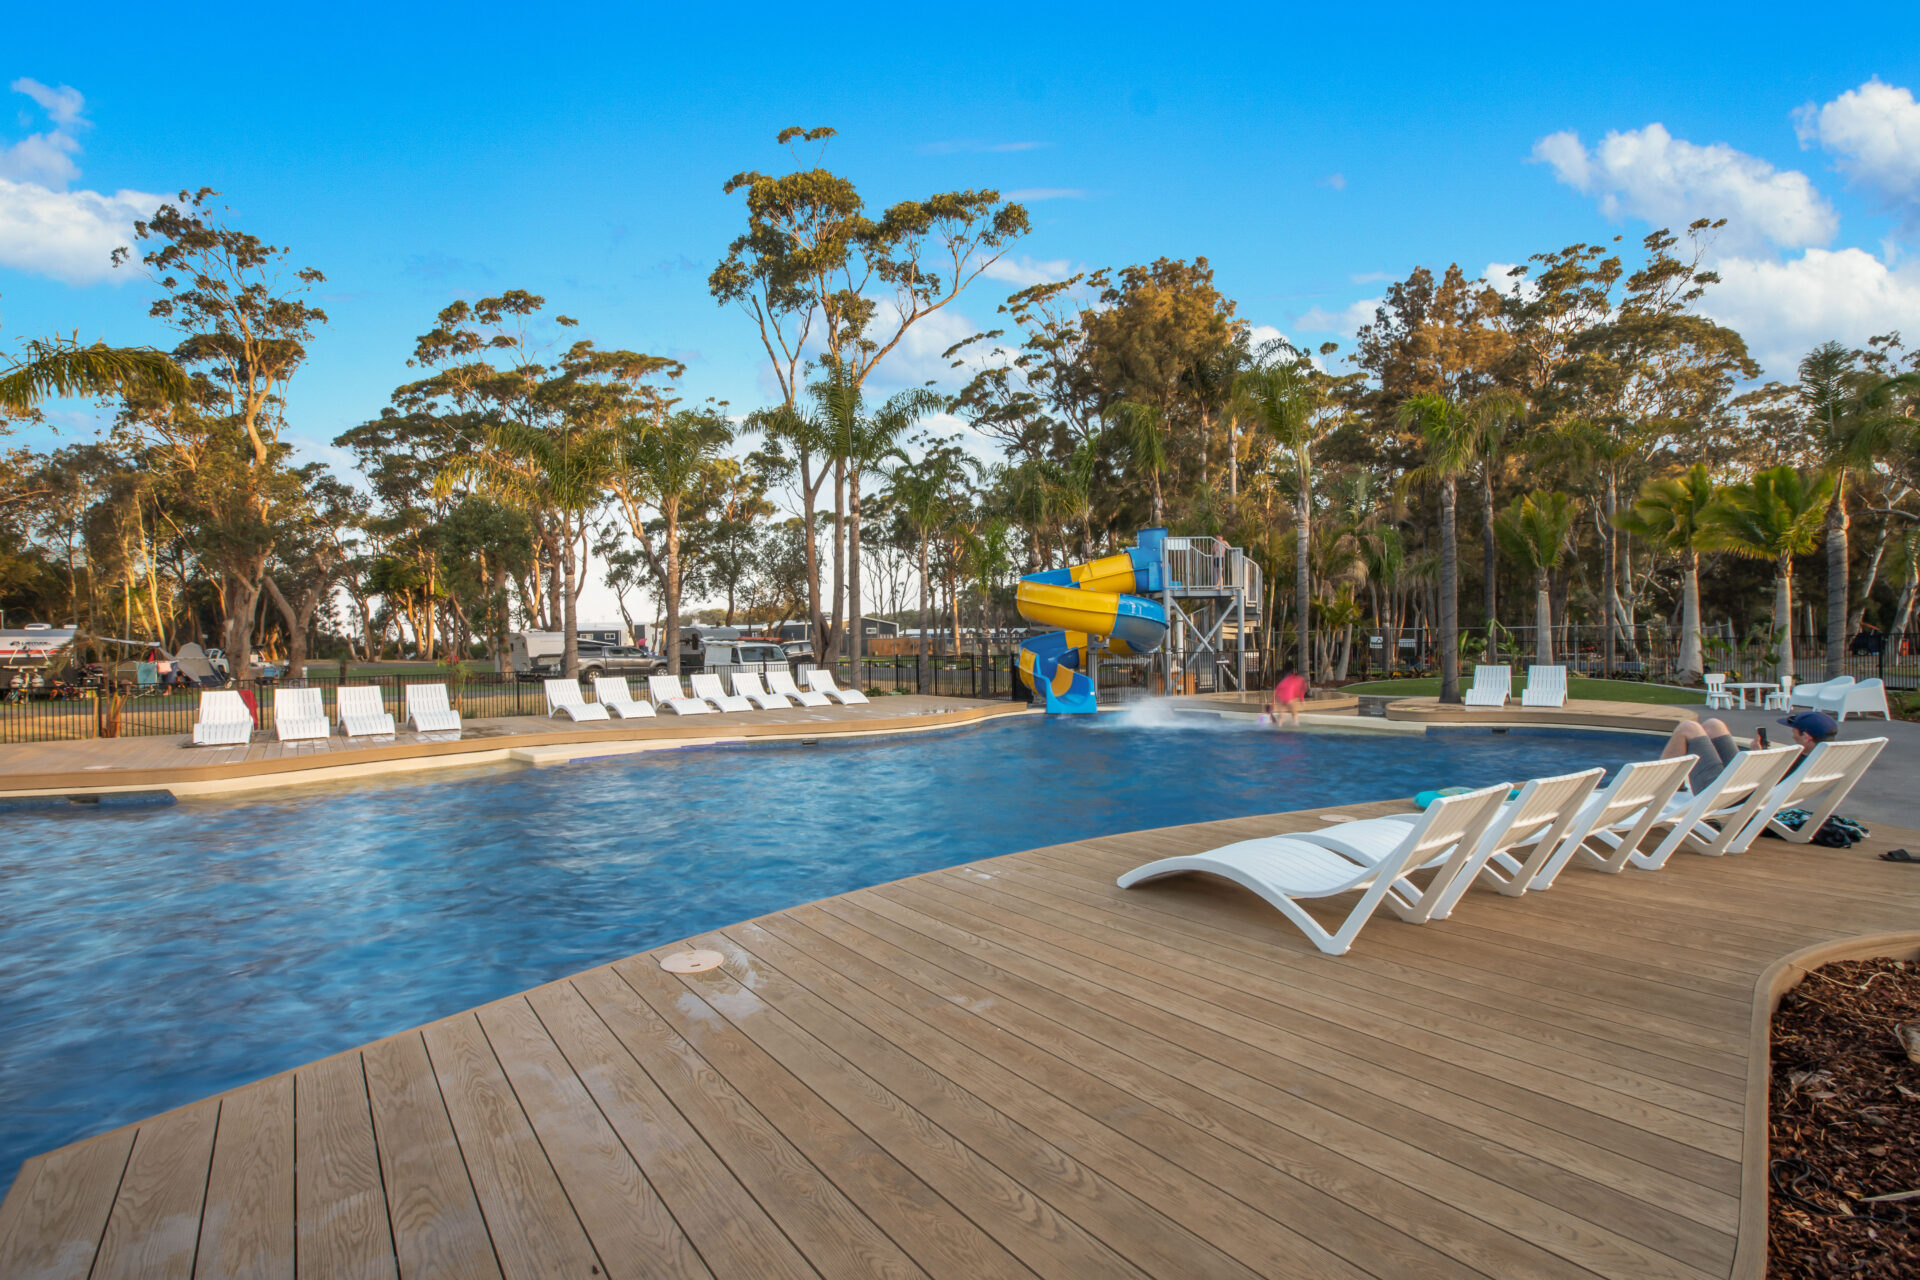 Swimming pool with sun loungers and waterslide | Tasman Holiday Parks Racecourse Beach